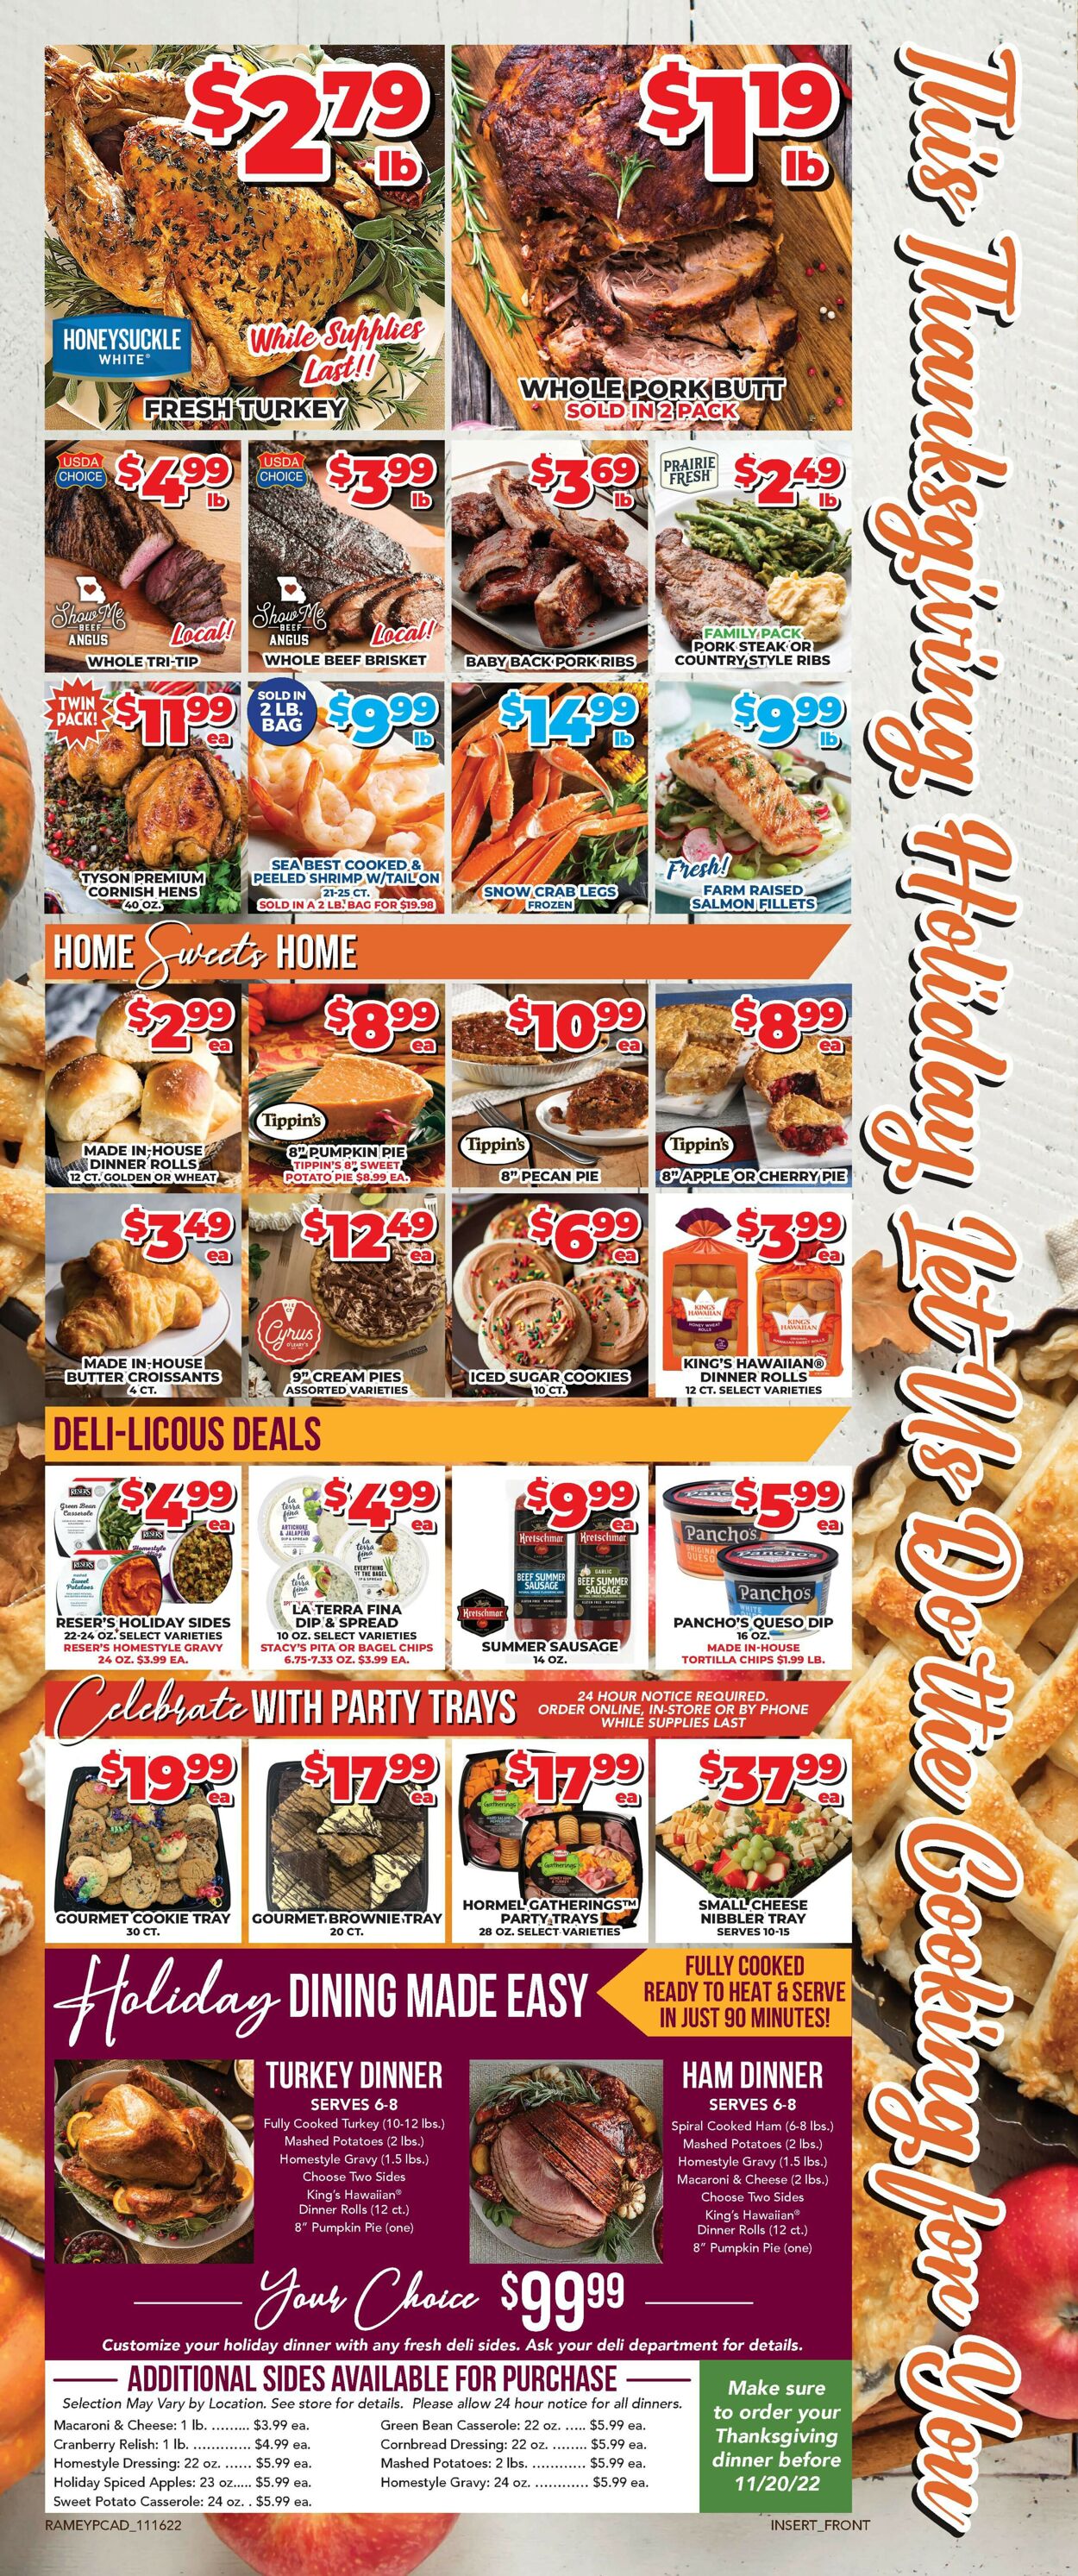 Price Cutter Weekly Ad Circular - valid 11/16-11/24/2022 (Page 3)